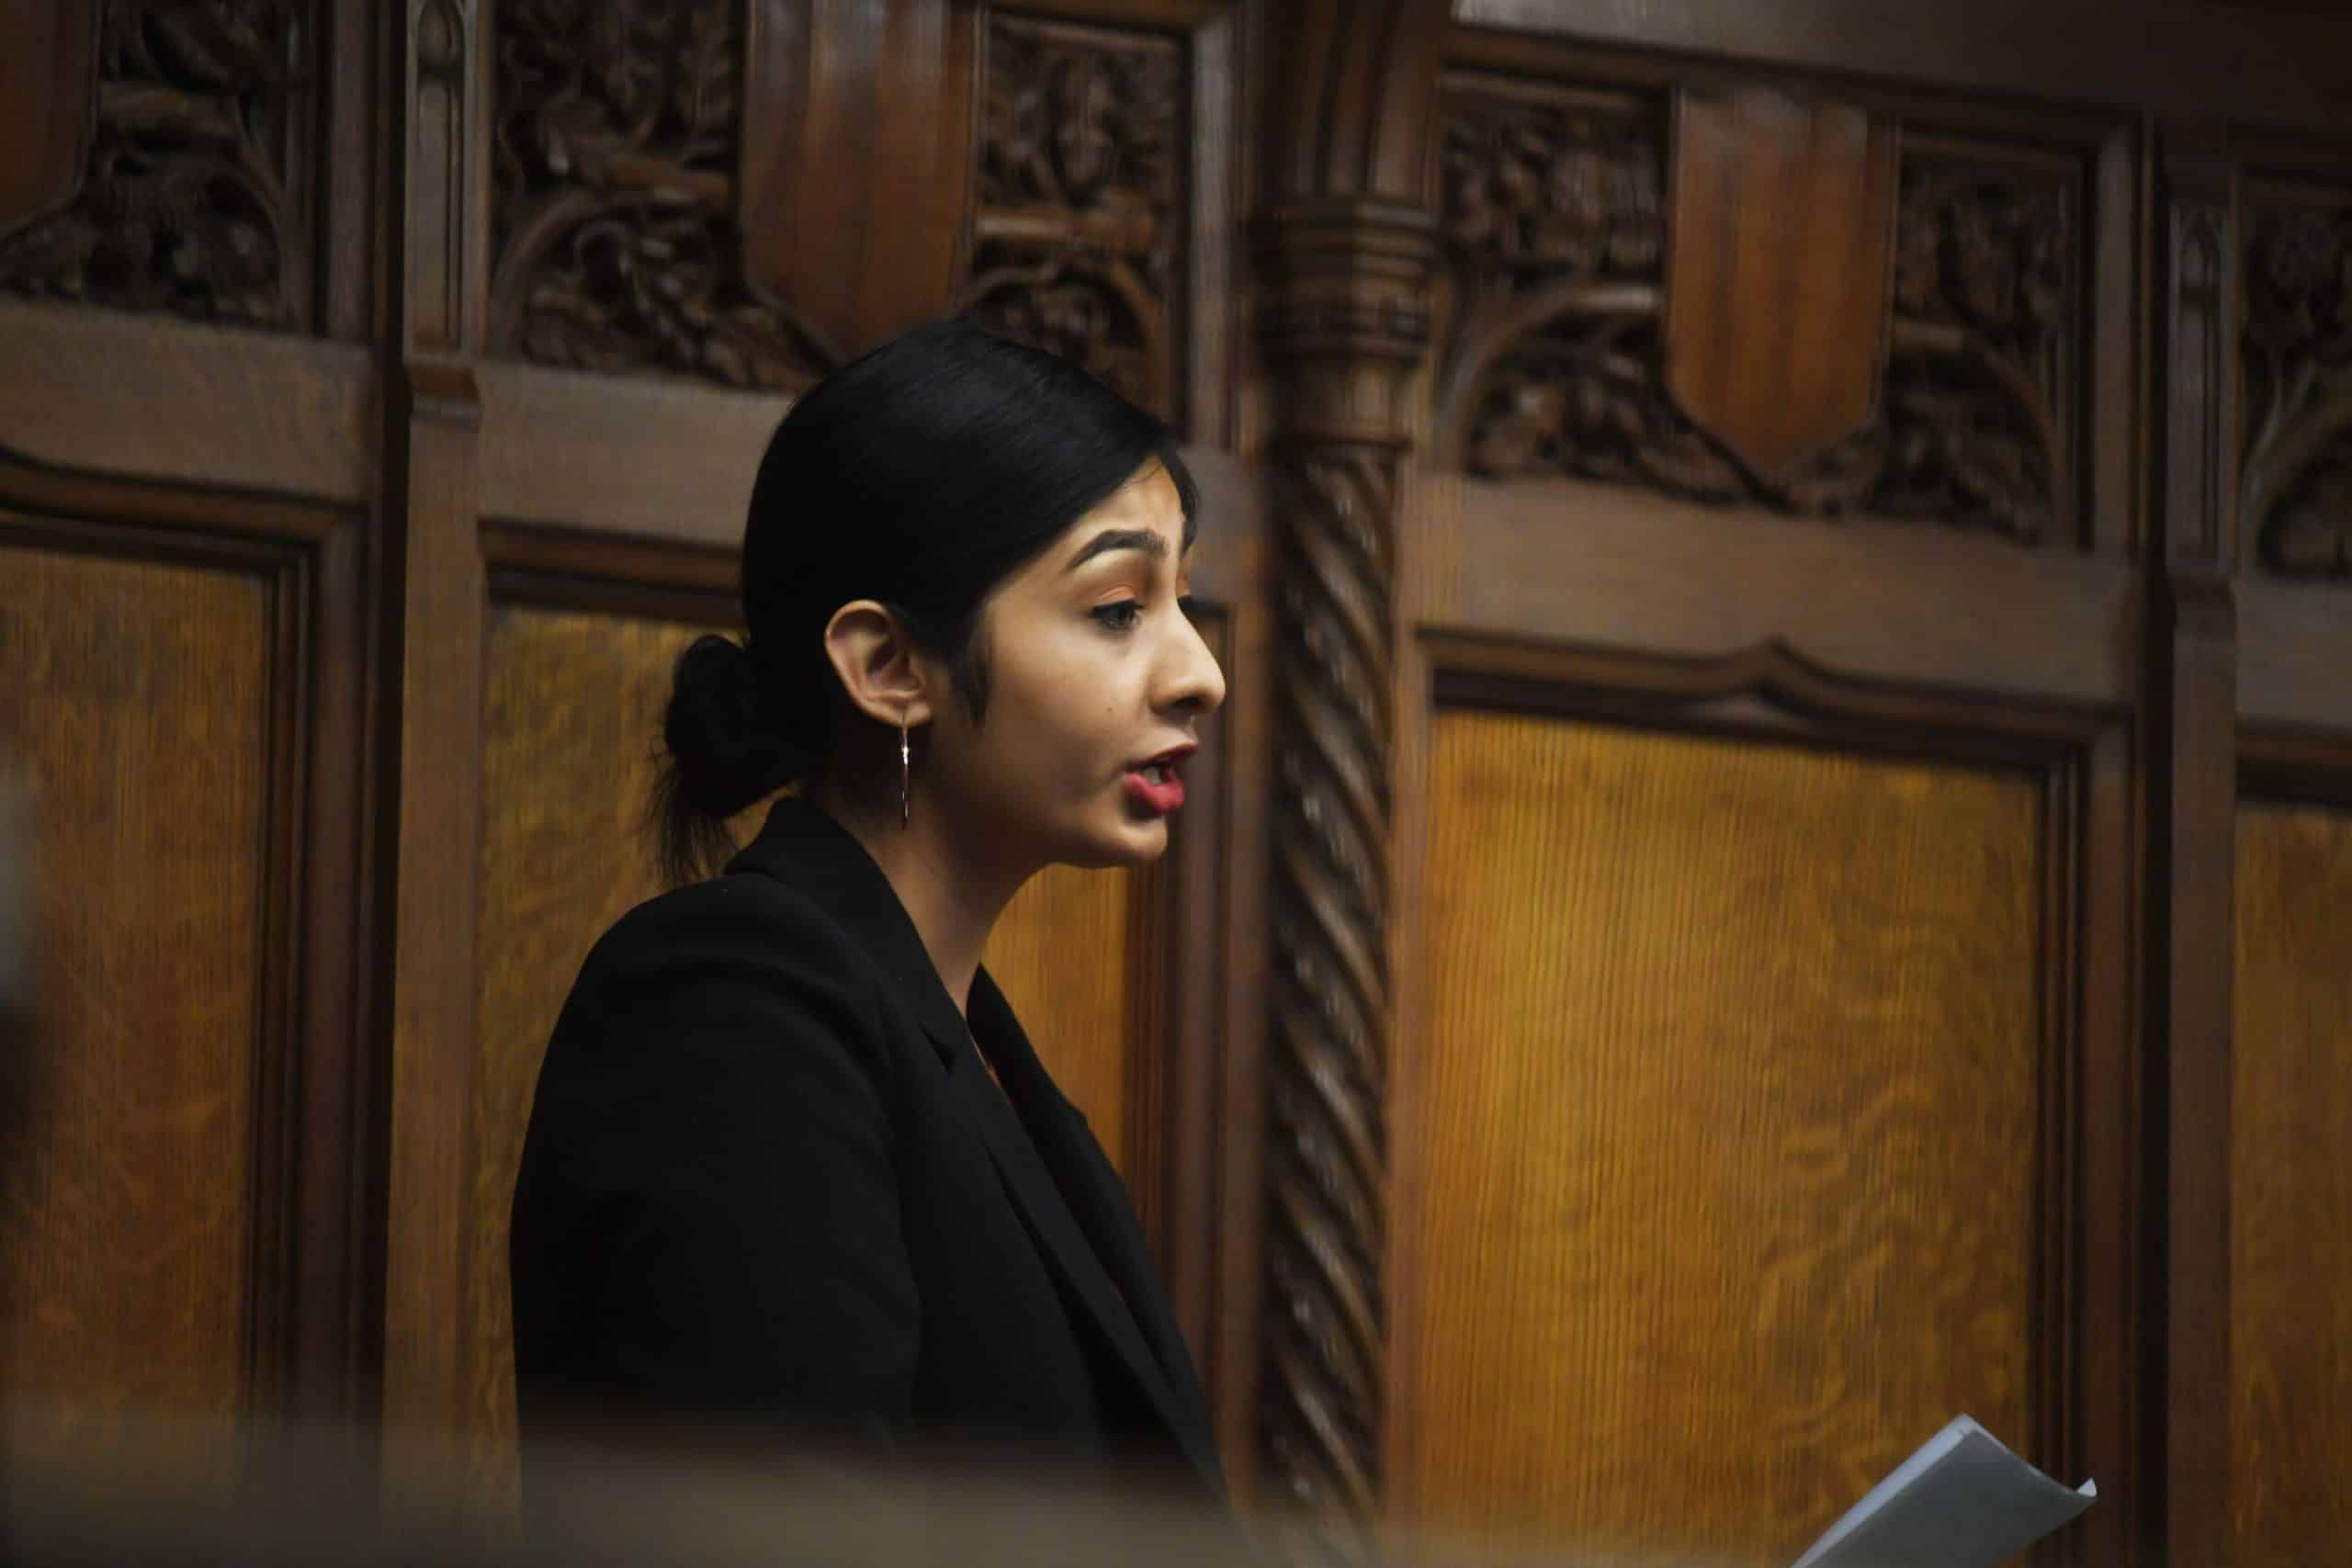 Zarah Sultana to donate MP pay rise to foodbanks and refugee charities